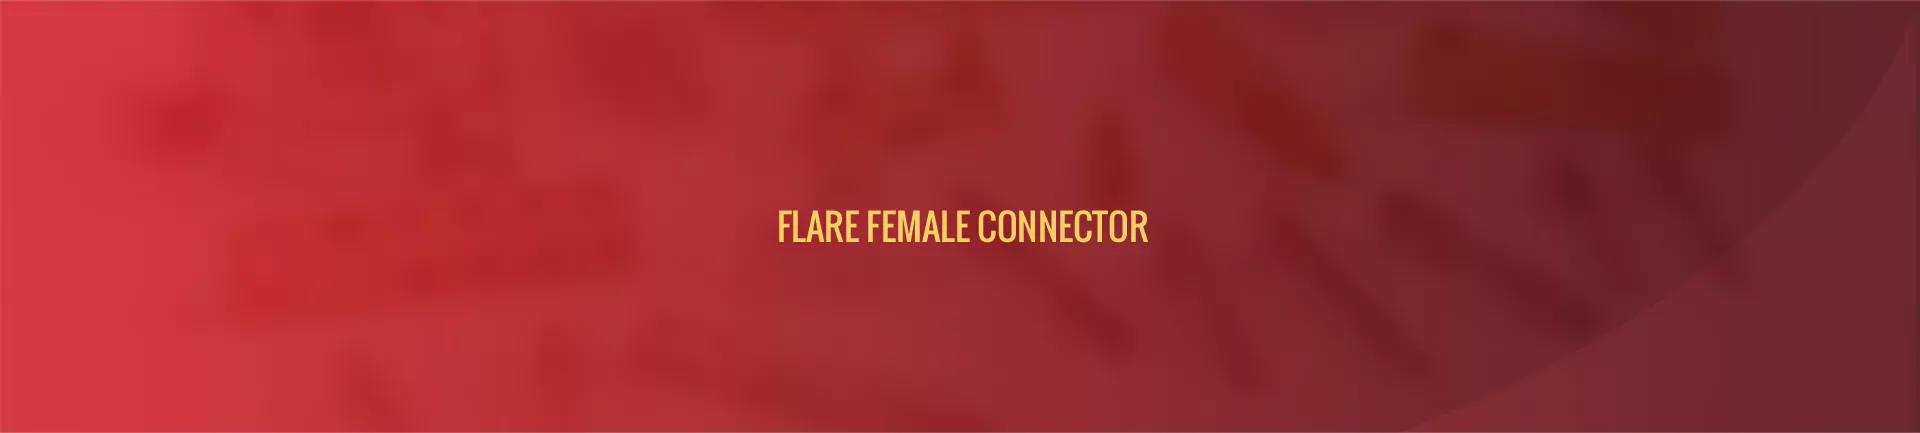 flare_female_connector-banner